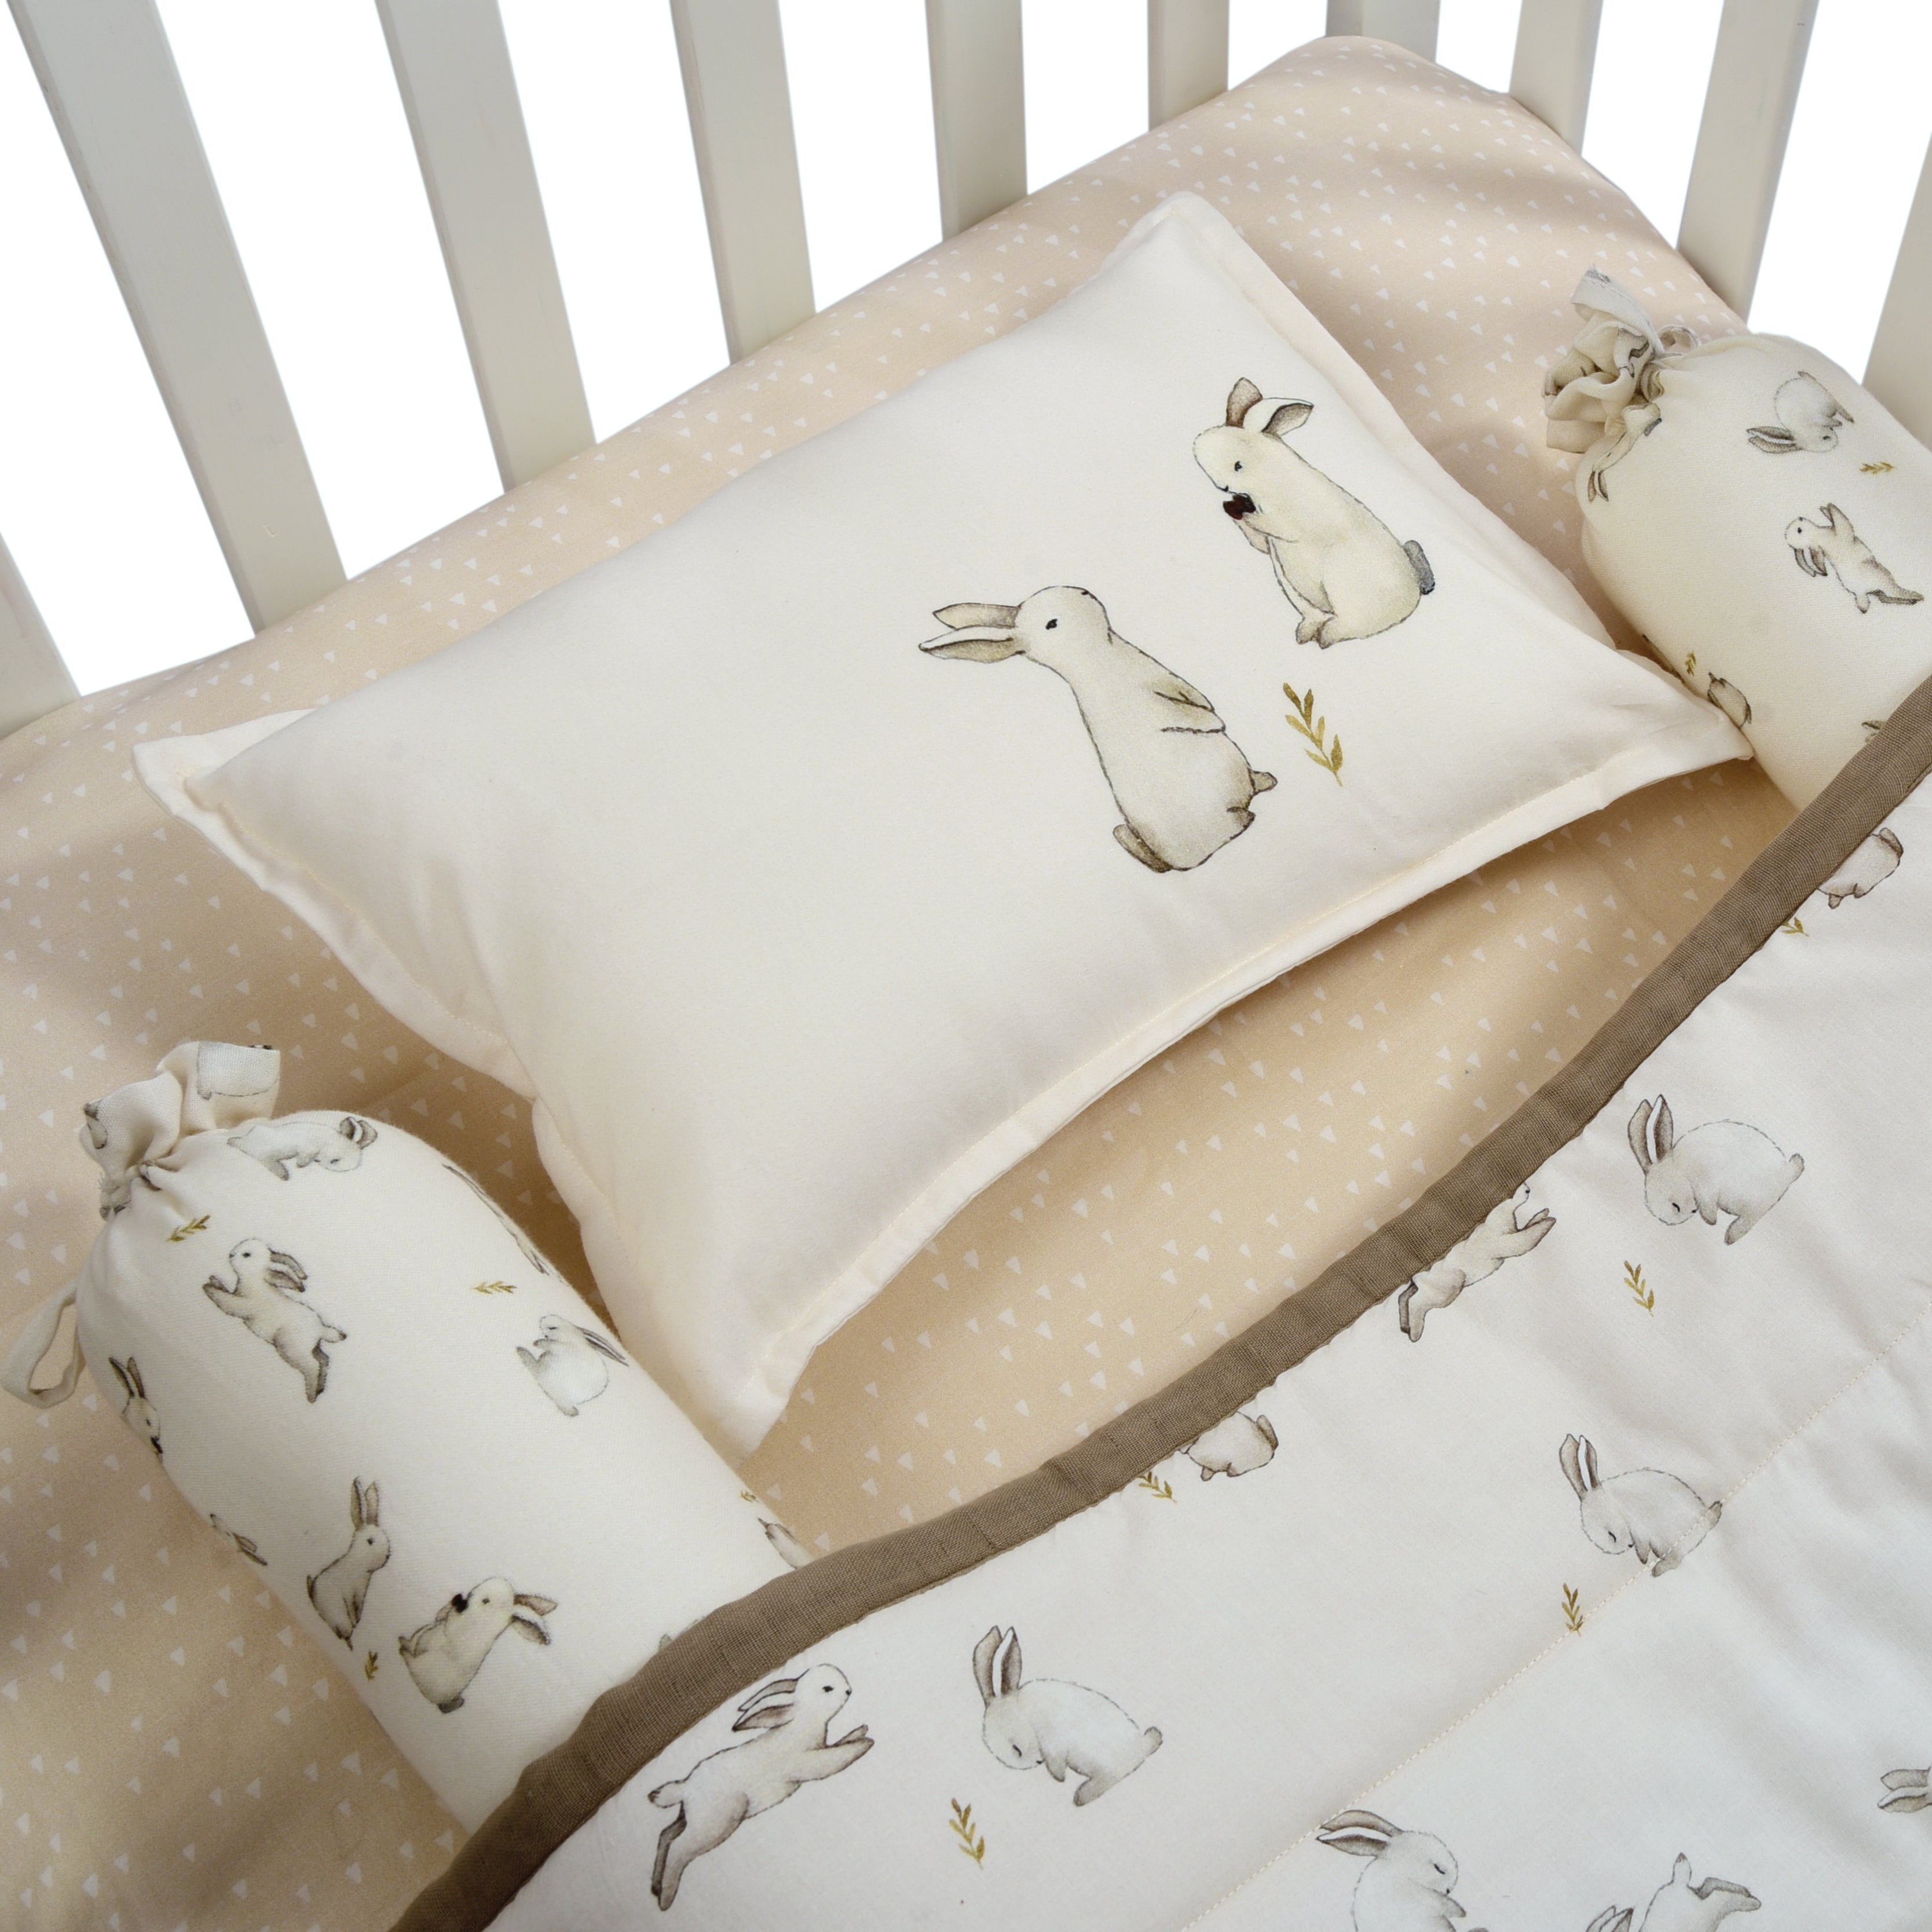 Enchanted Bunny Muslin Cot Bedding Set - Lil Mulberry